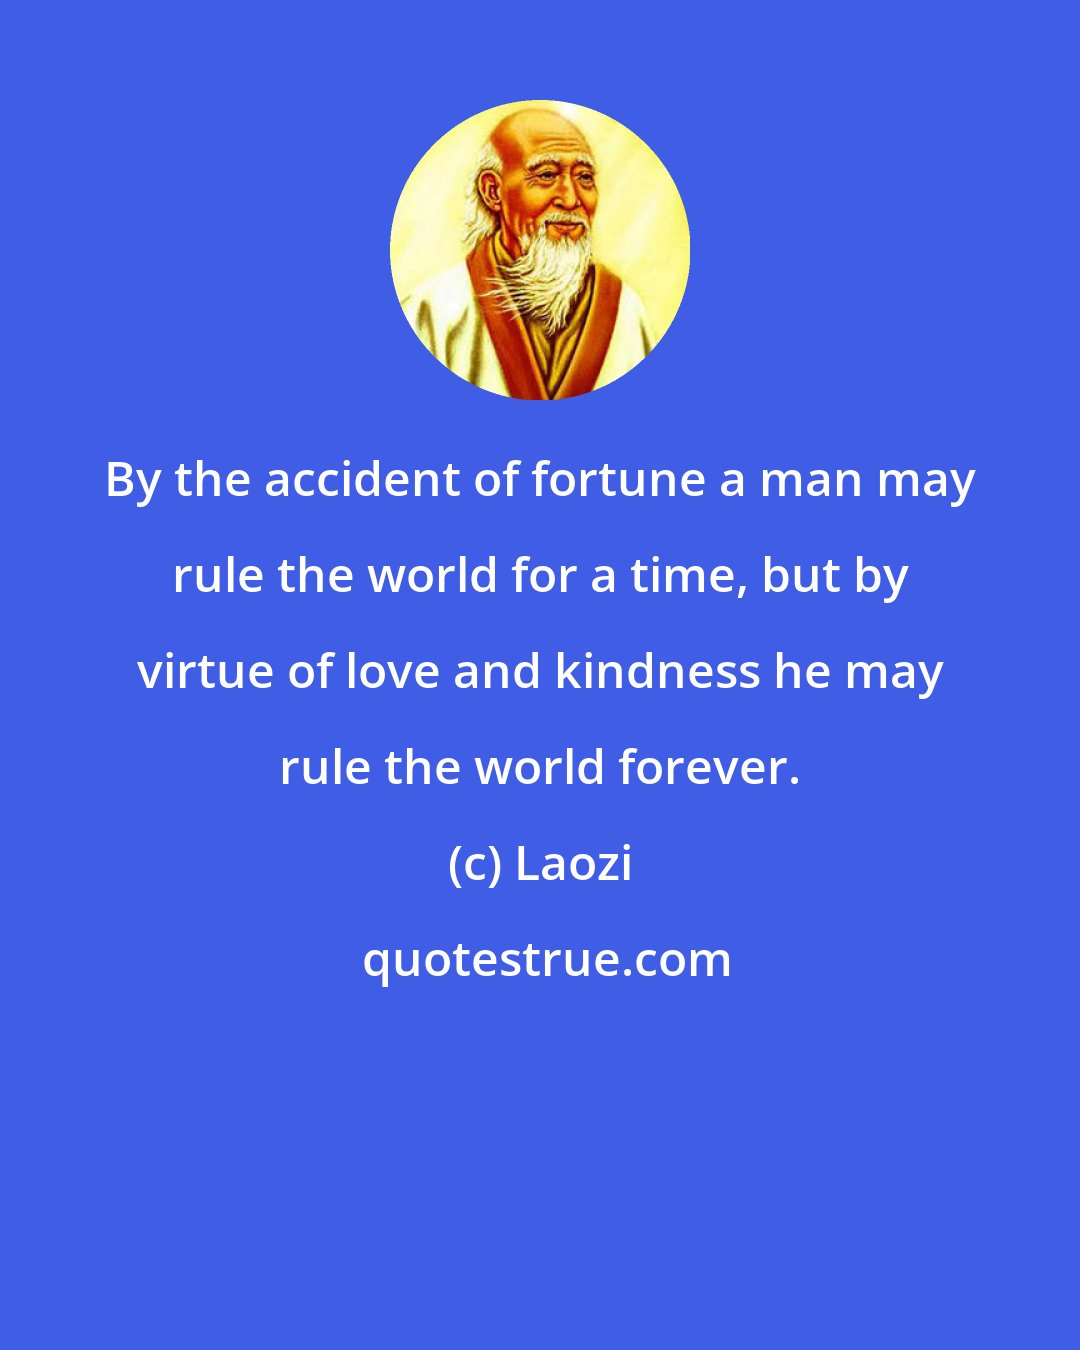 Laozi: By the accident of fortune a man may rule the world for a time, but by virtue of love and kindness he may rule the world forever.